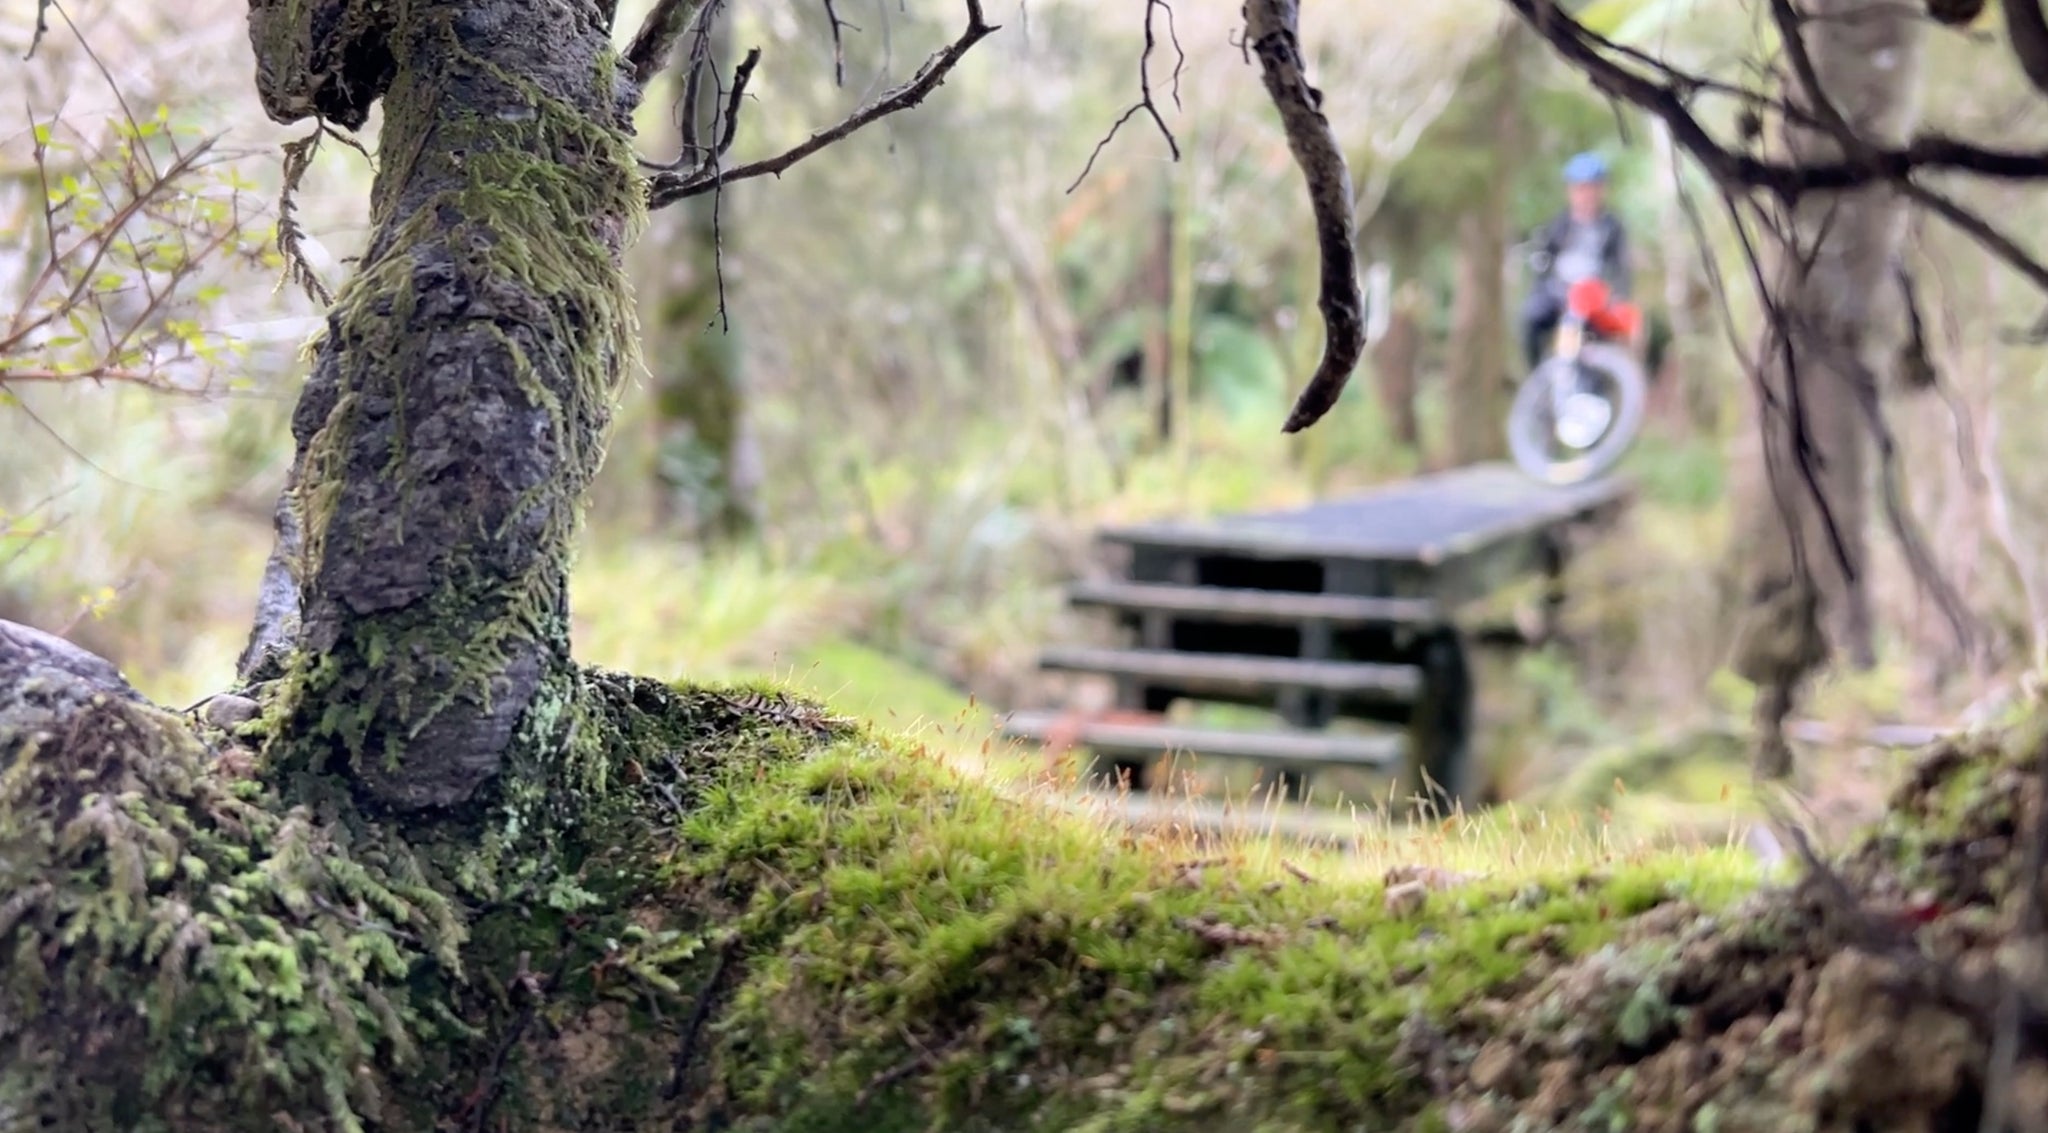 THE NYDIA TRACK - "The best ride you've never heard of" - Bikepacking New Zealand